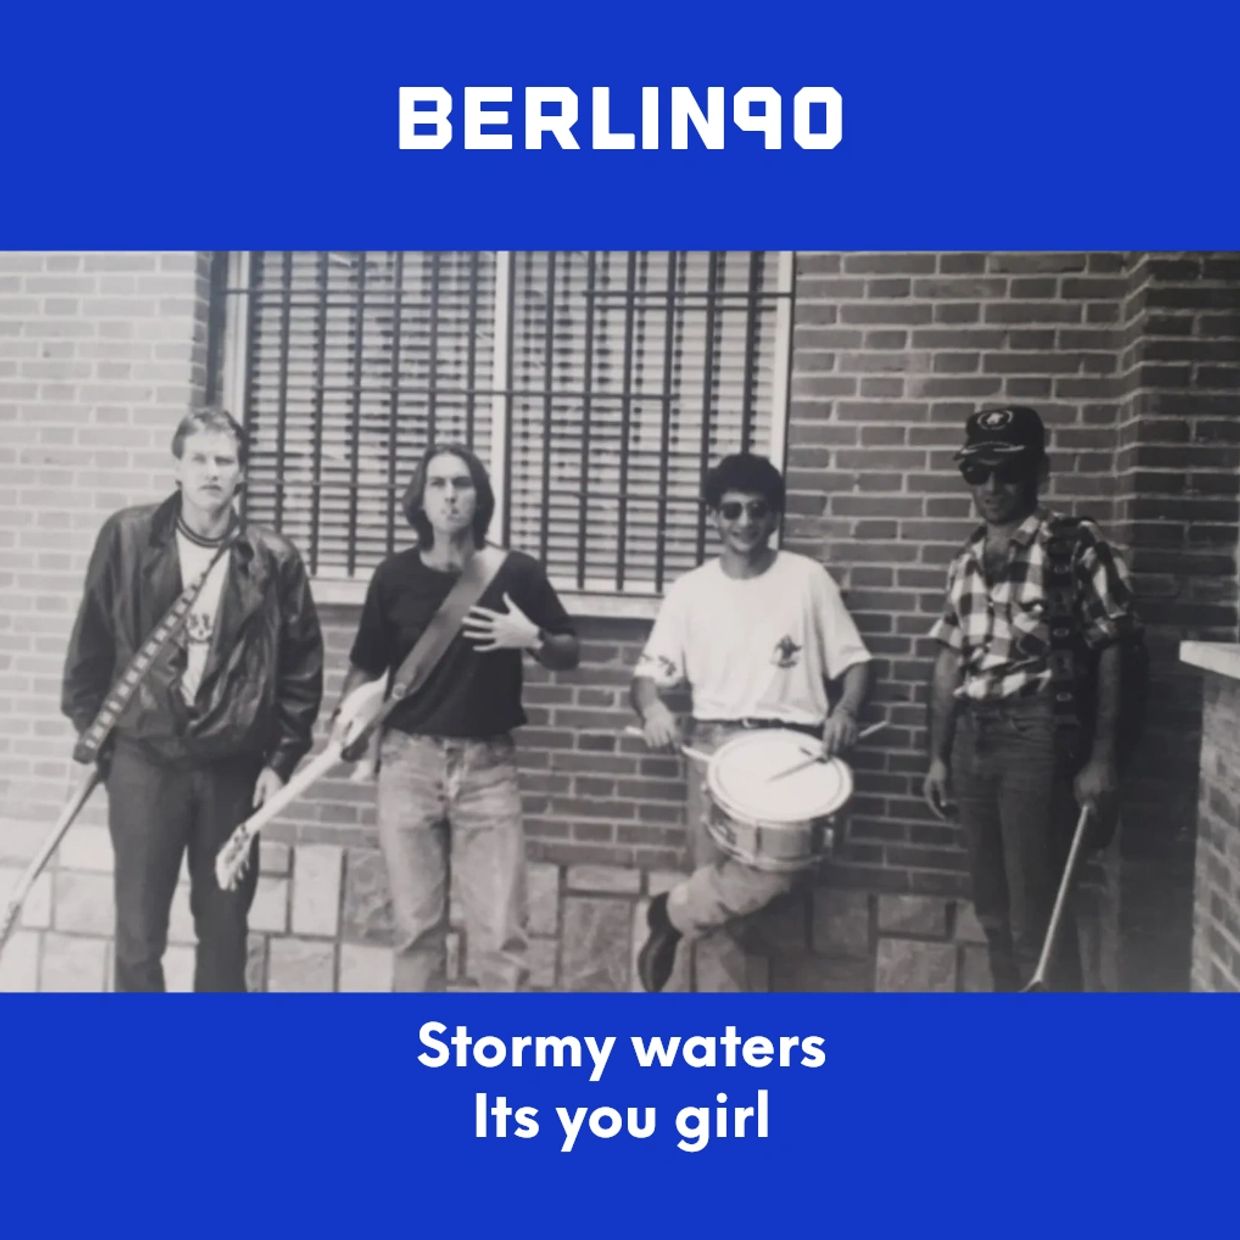 The band Berlin90 Sangonera la verde prison Murcia 1991 "Stormy waters"  and "It`s you girl" 